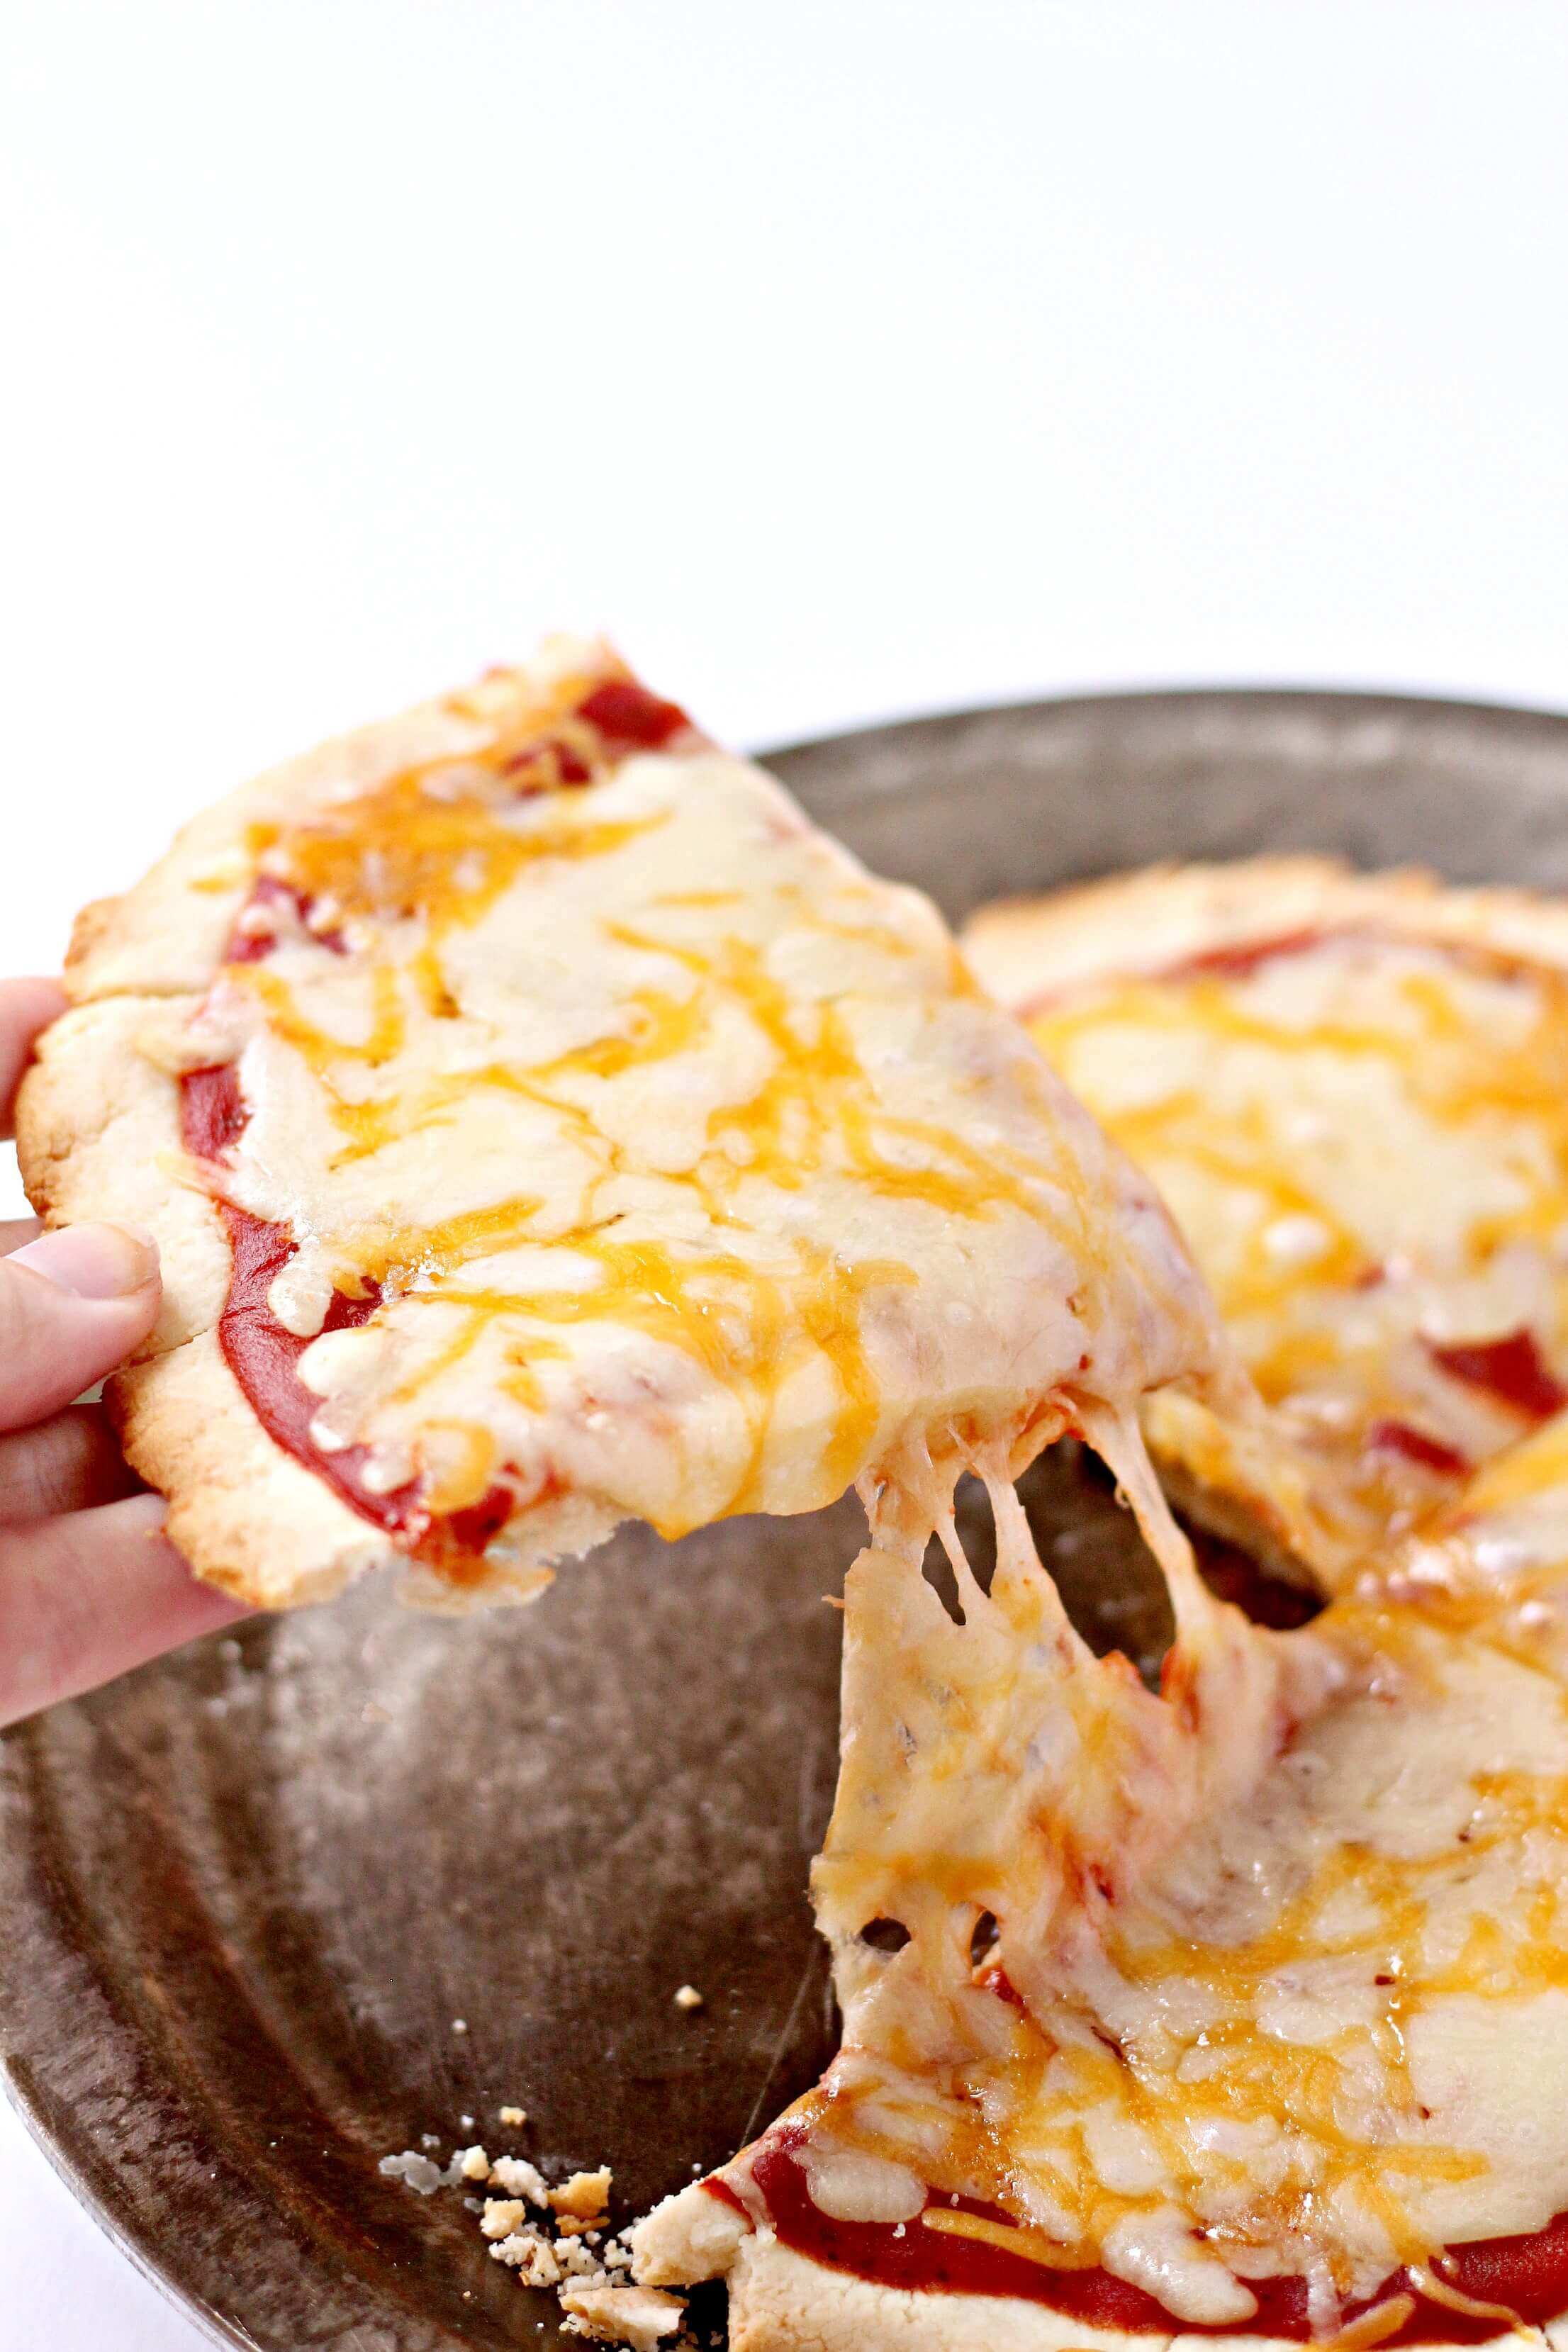 Cheese Pizza with a Gluten-Free Crust